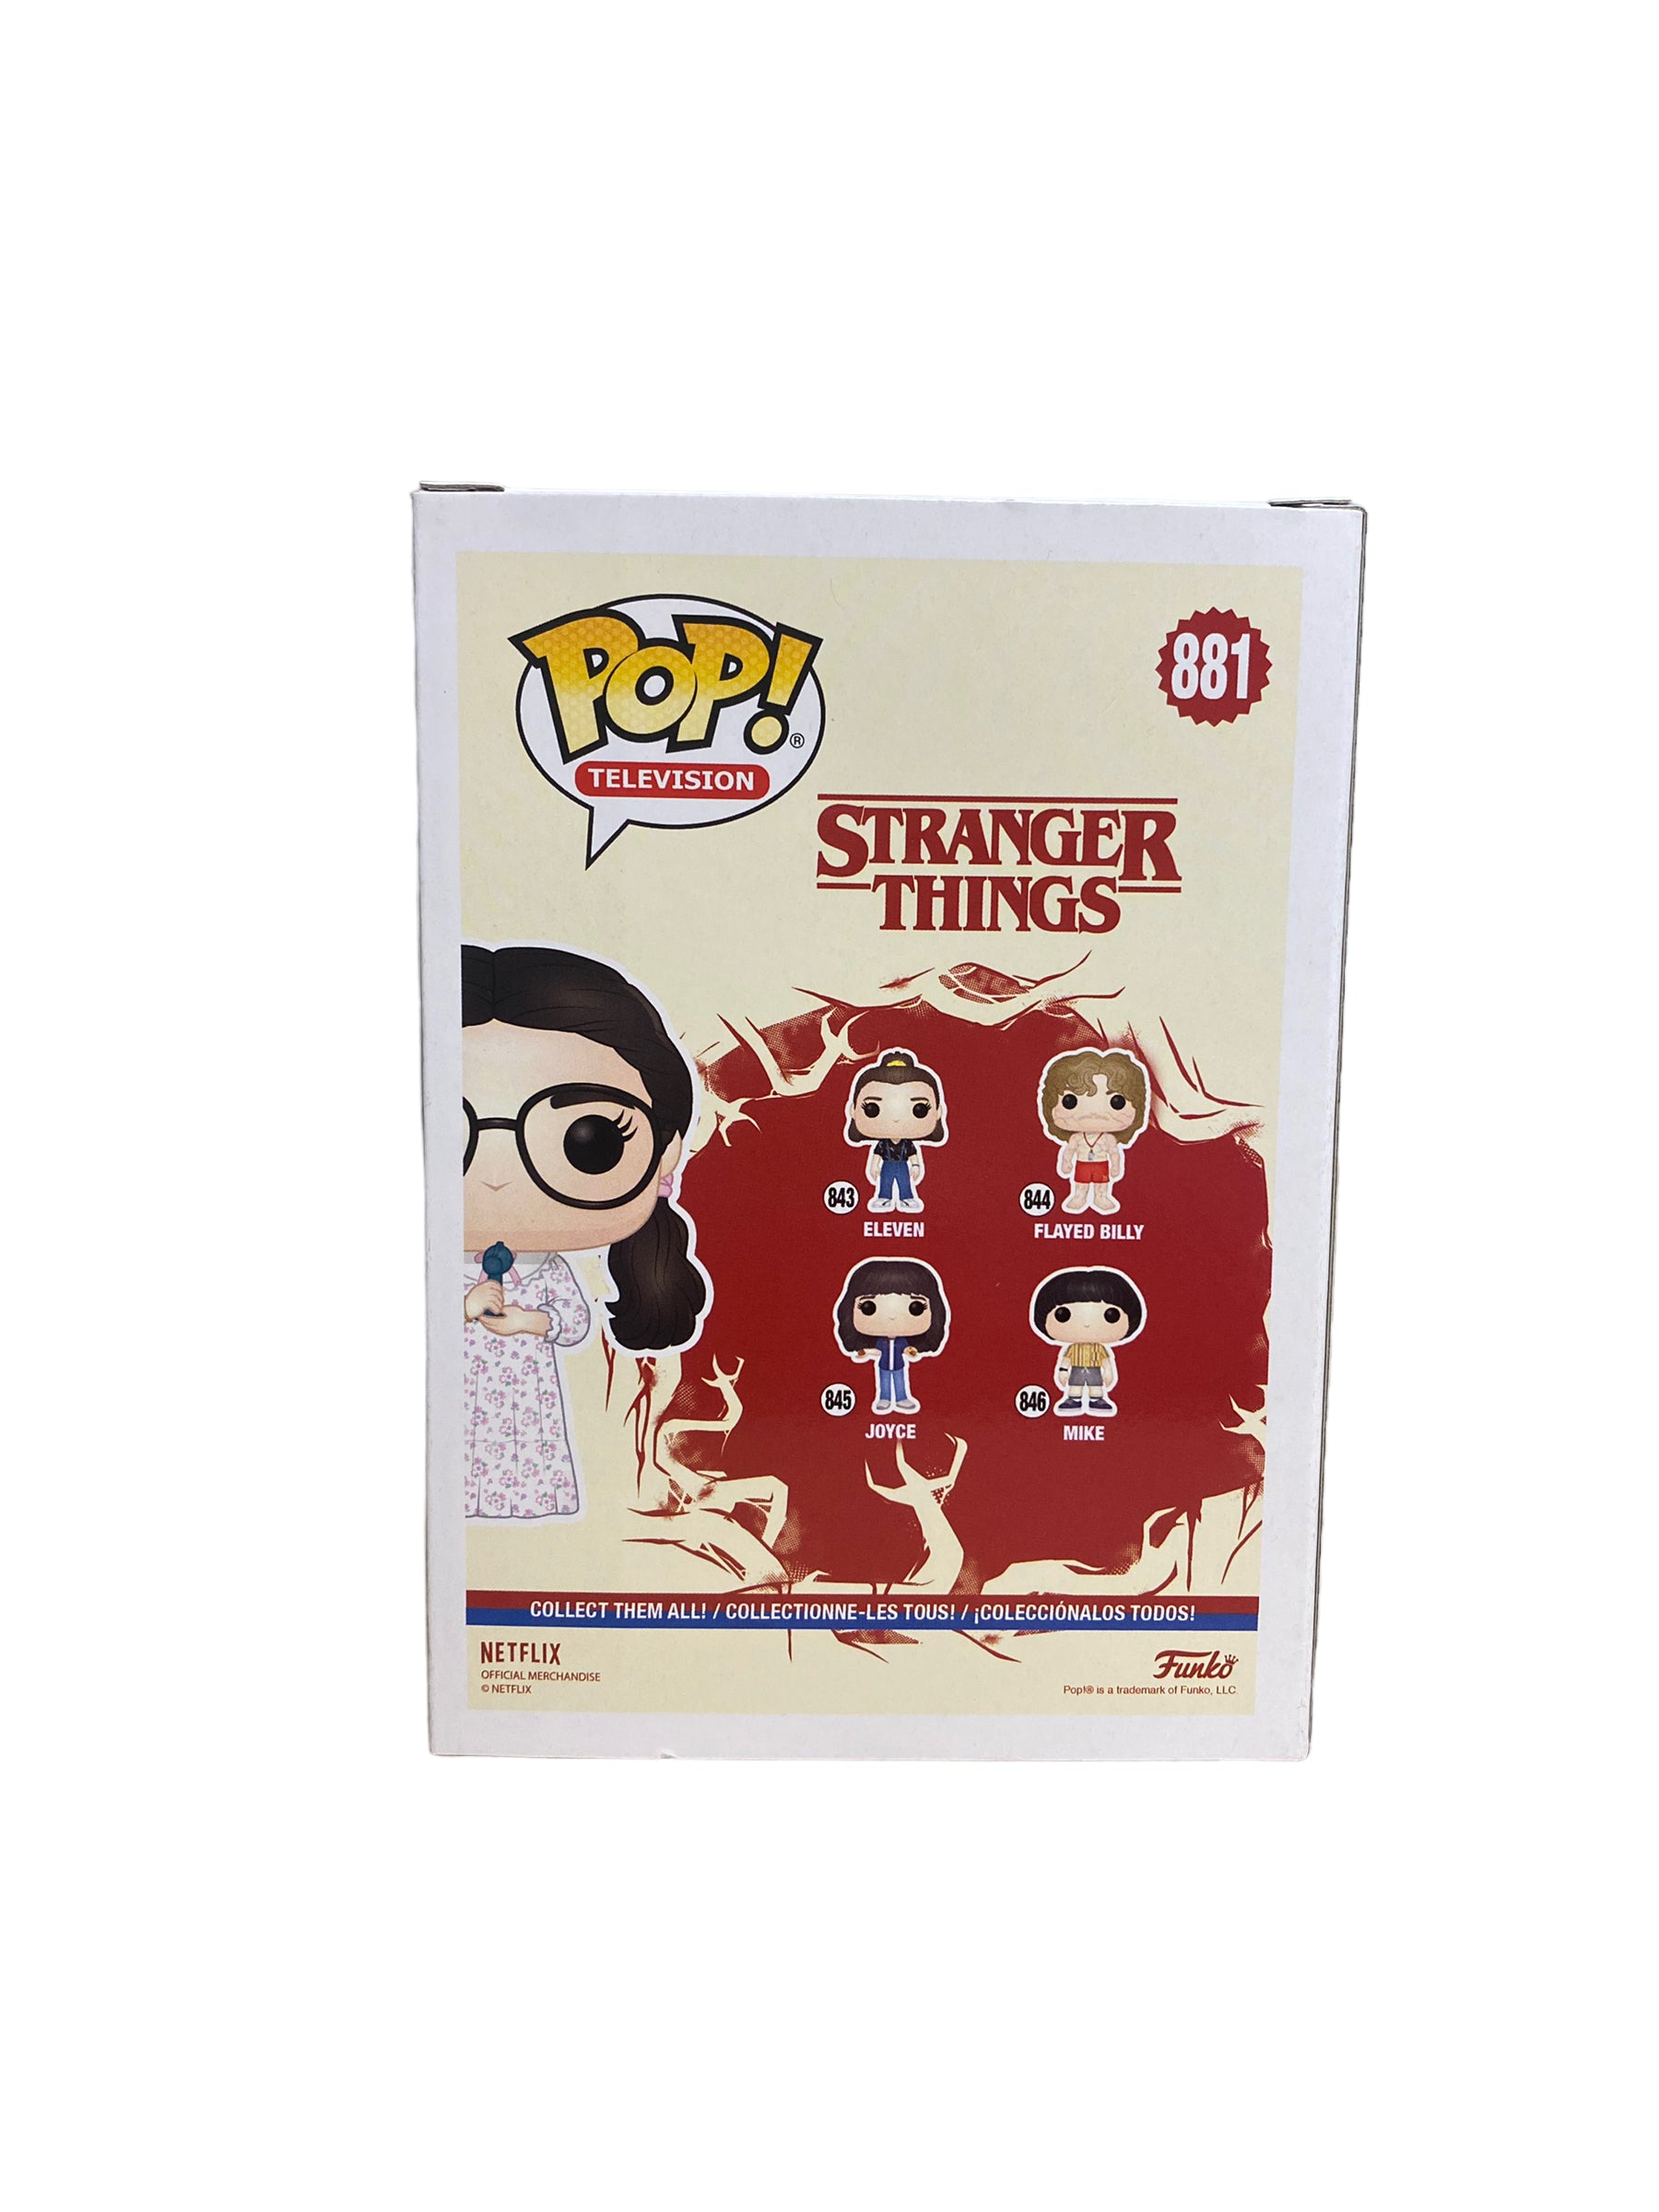 Suzie #881 Funko Pop! - Stranger Things - NYCC 2019 Shared Exclusive - Condition 8/10